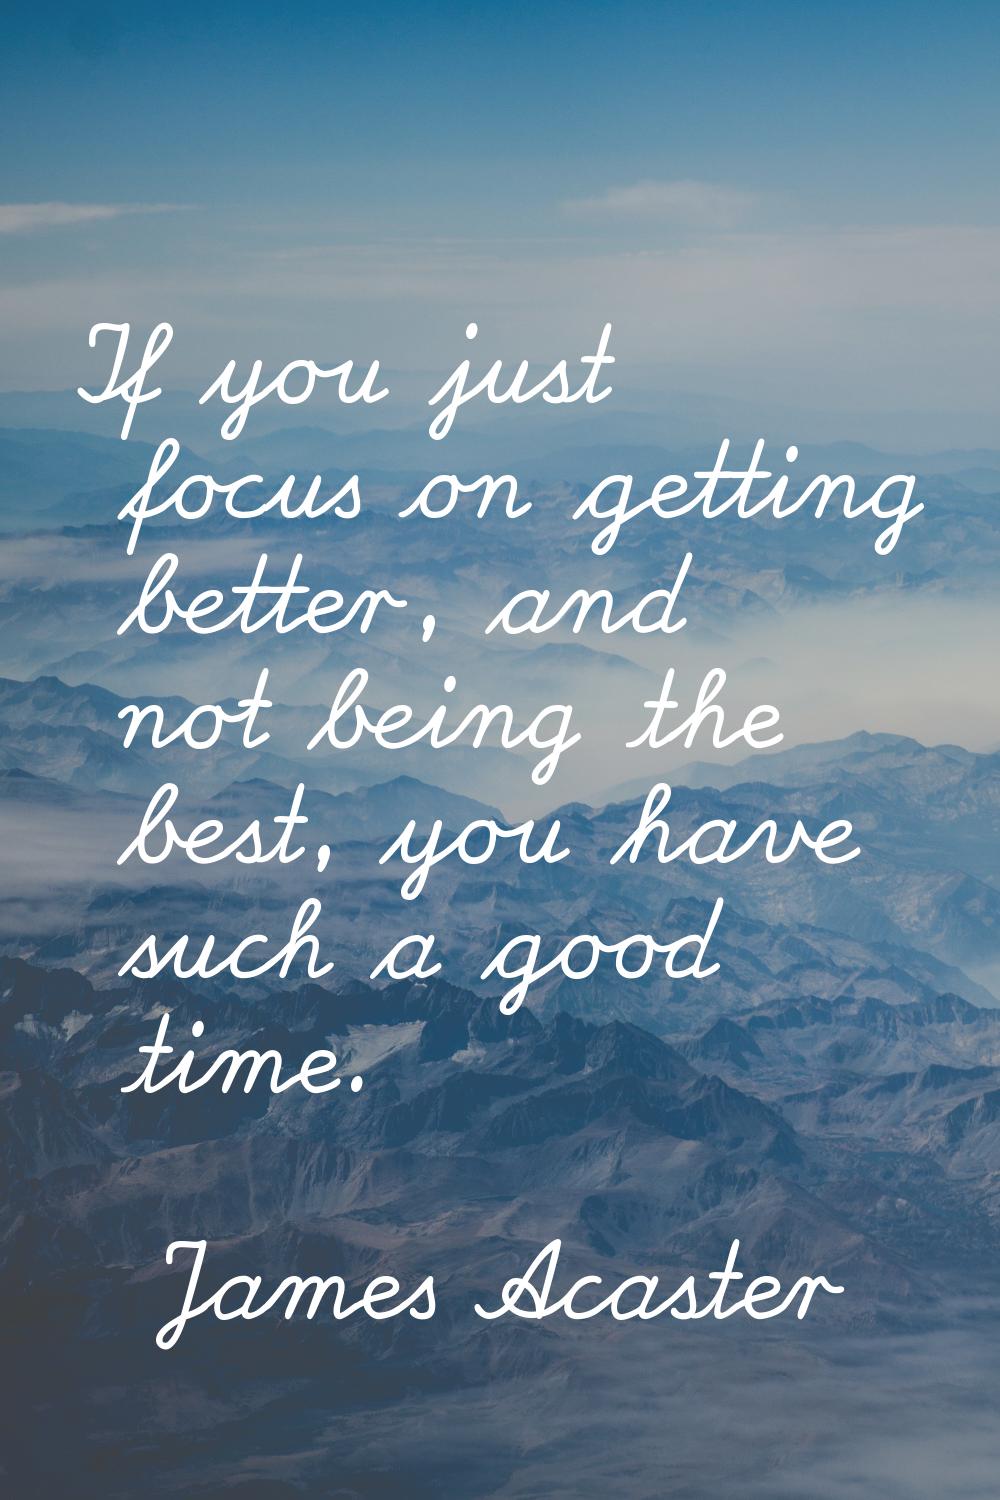 If you just focus on getting better, and not being the best, you have such a good time.